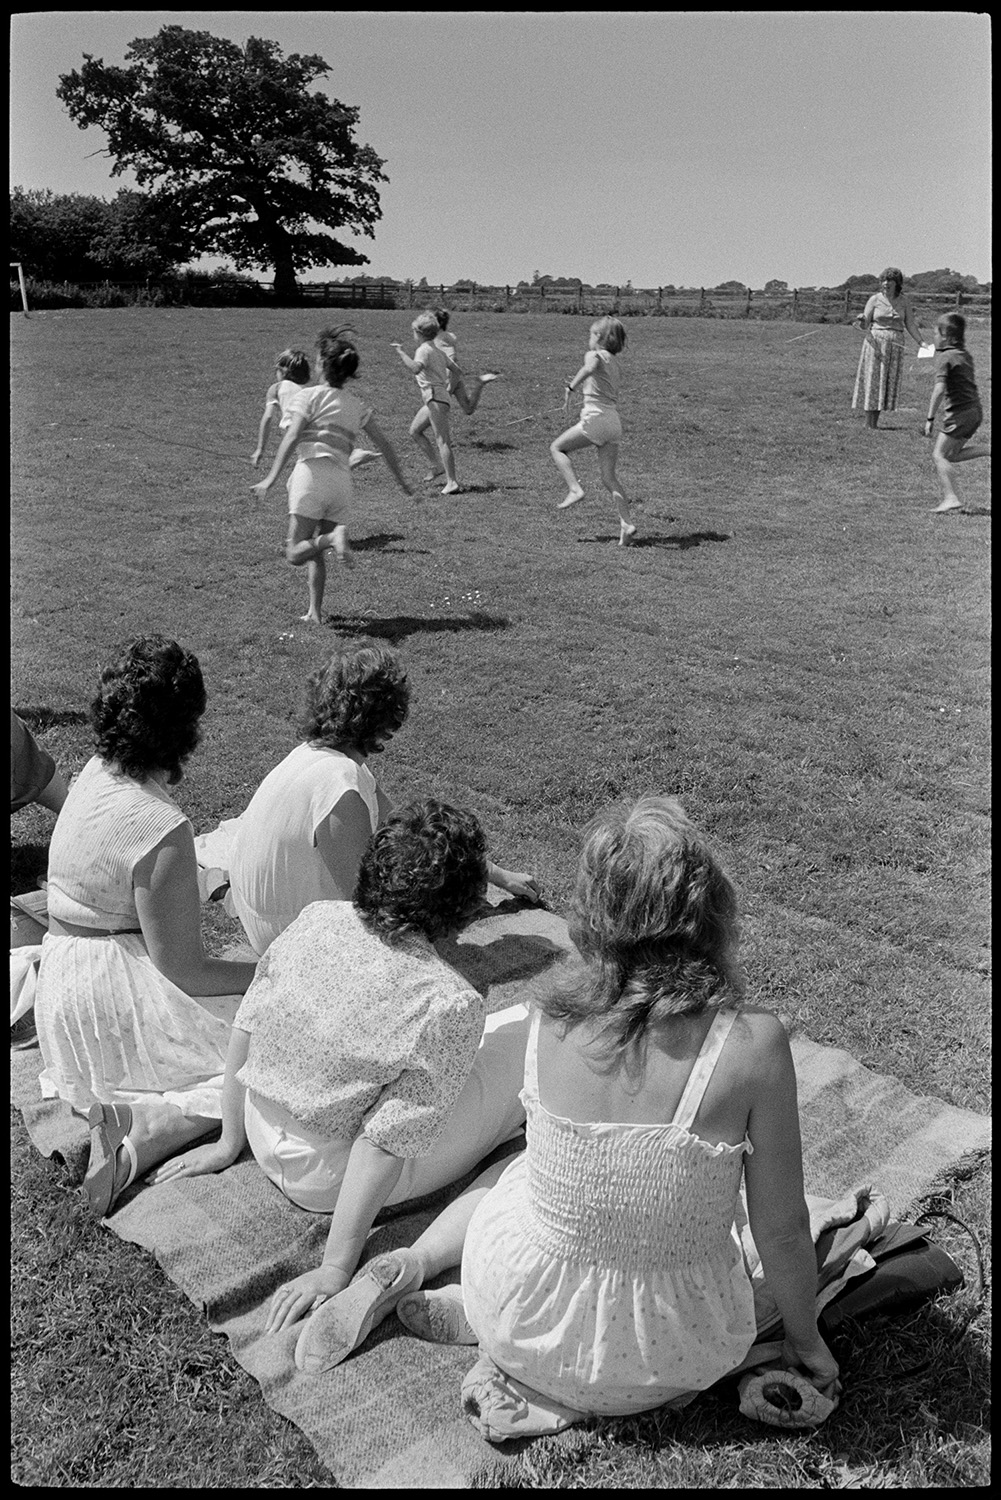 School sports day, races, people sitting in sun and shade waiting to run. 
[Four women sat on picnic rugs at Dolton School sports day. They are watching children compete in a running race.]